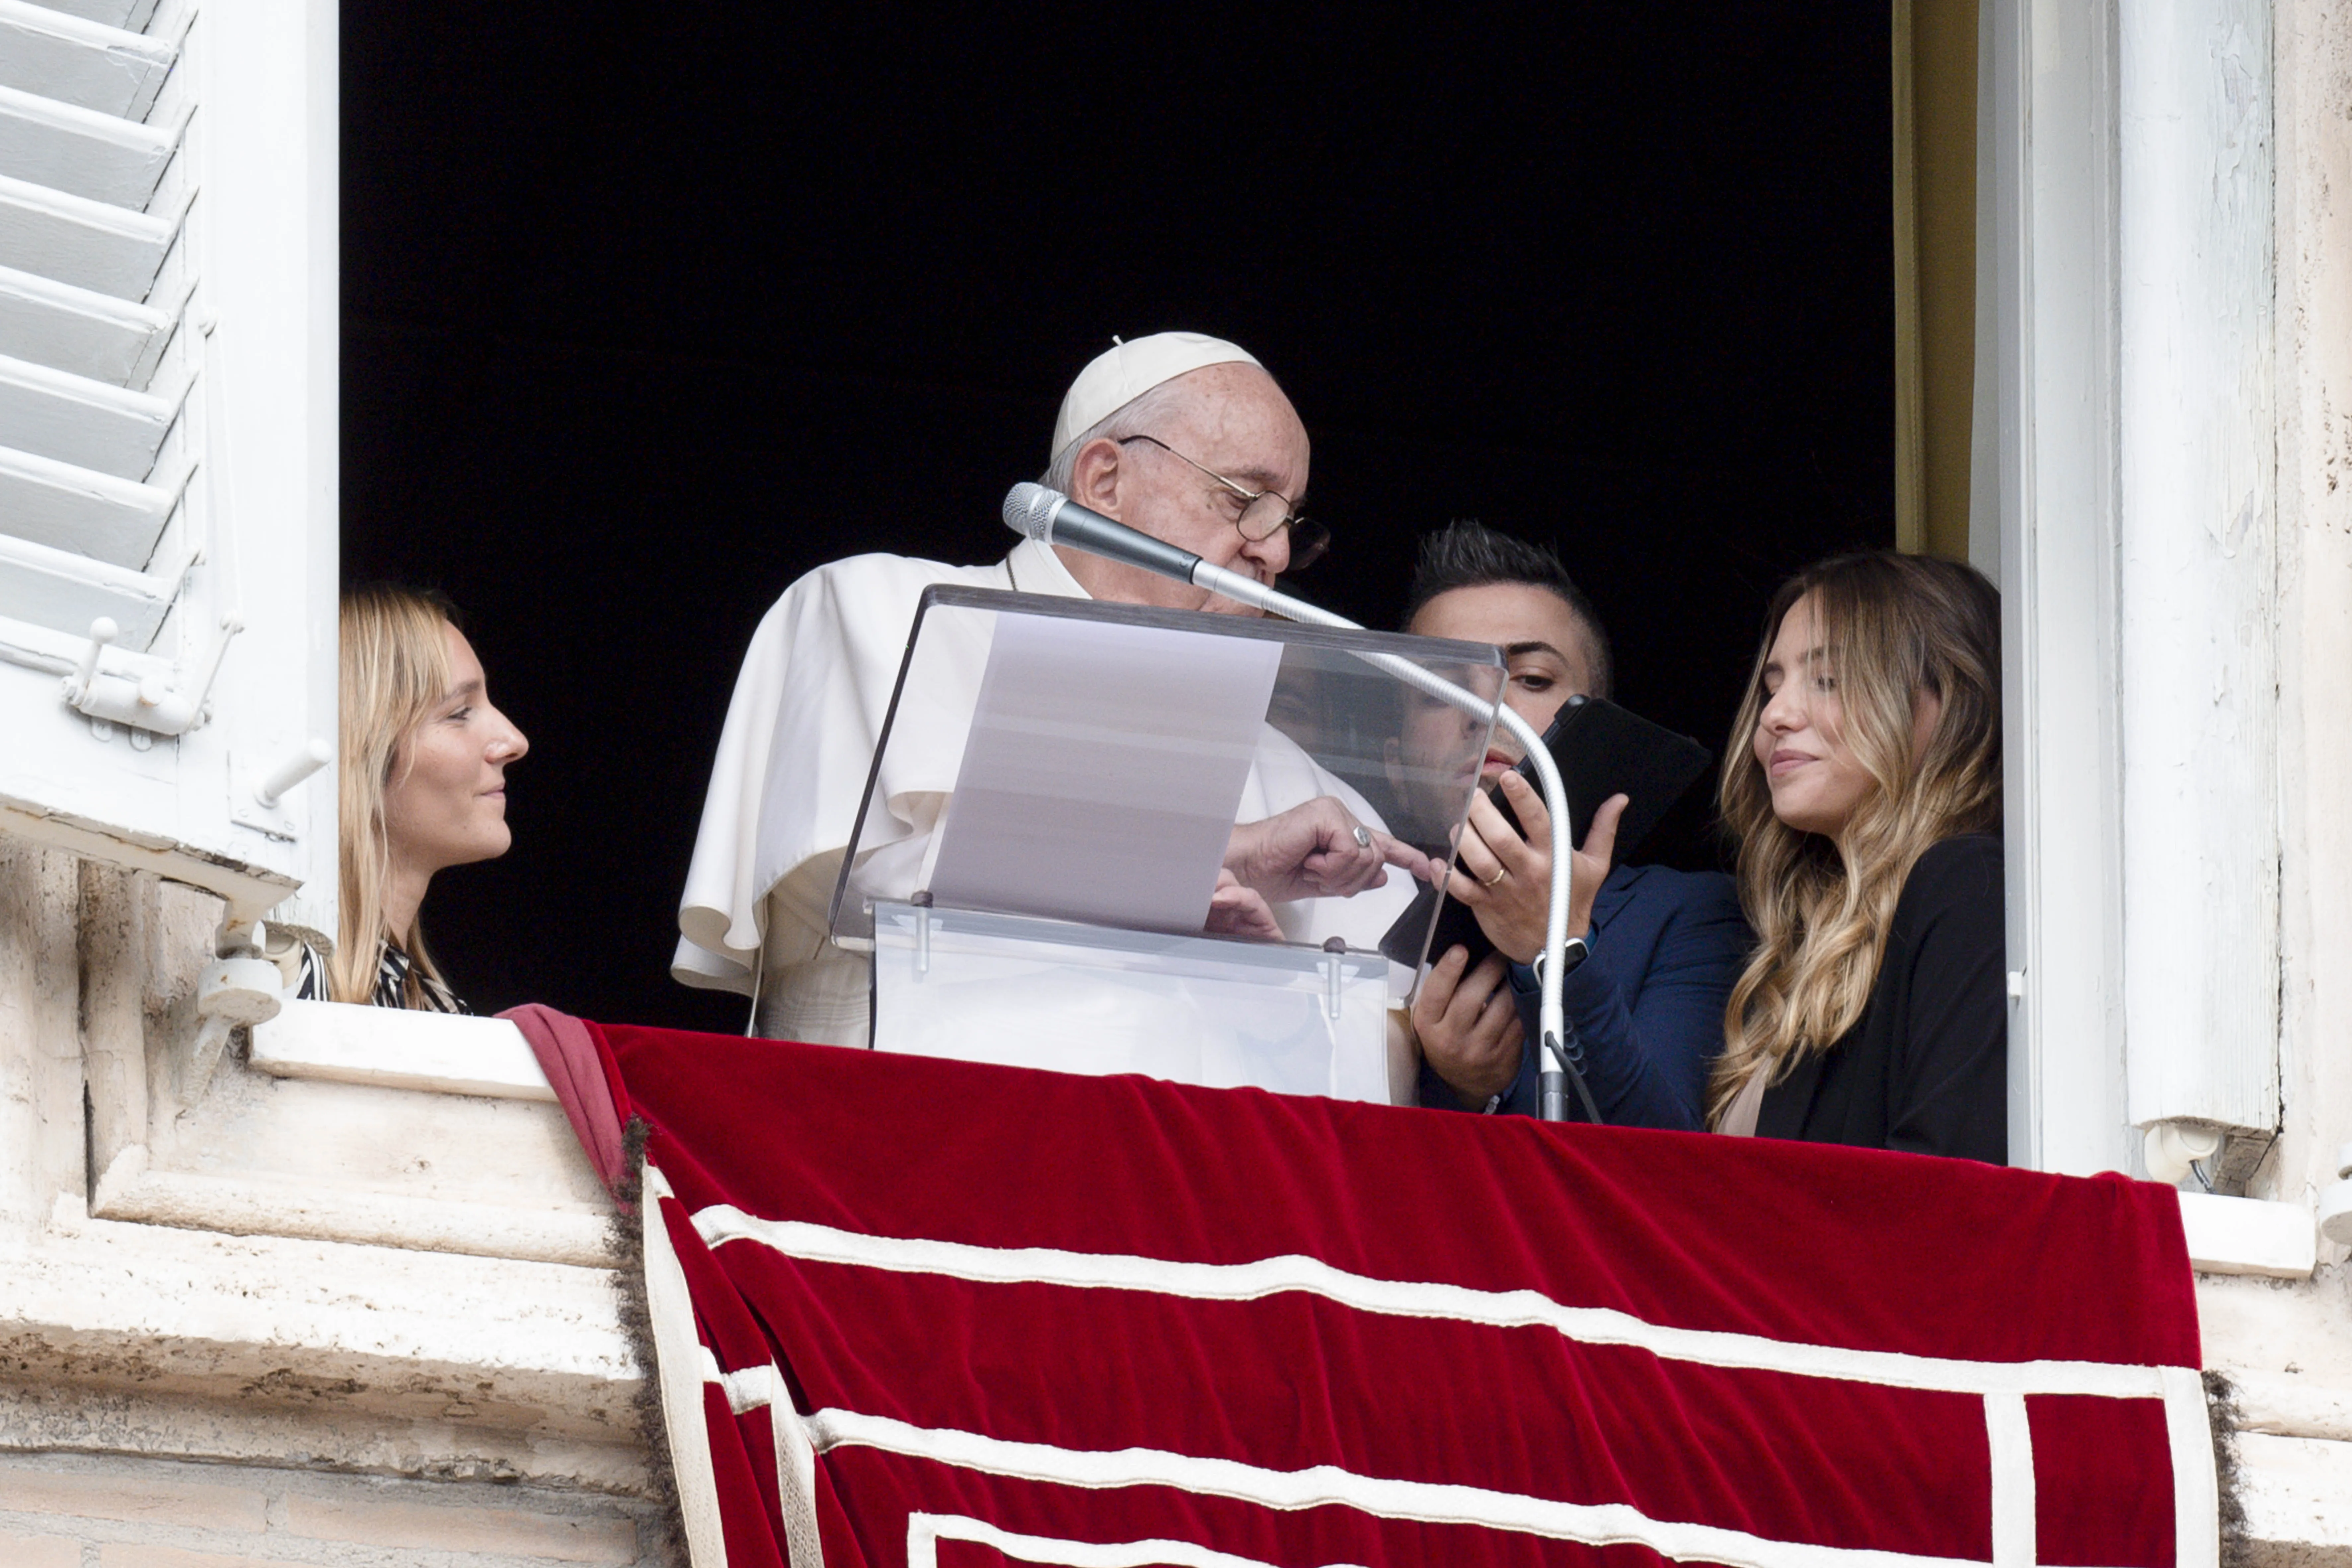 Pope Francis registers for World Youth Day 2023 at the end of his Angelus address on Oct. 23, 2022.?w=200&h=150